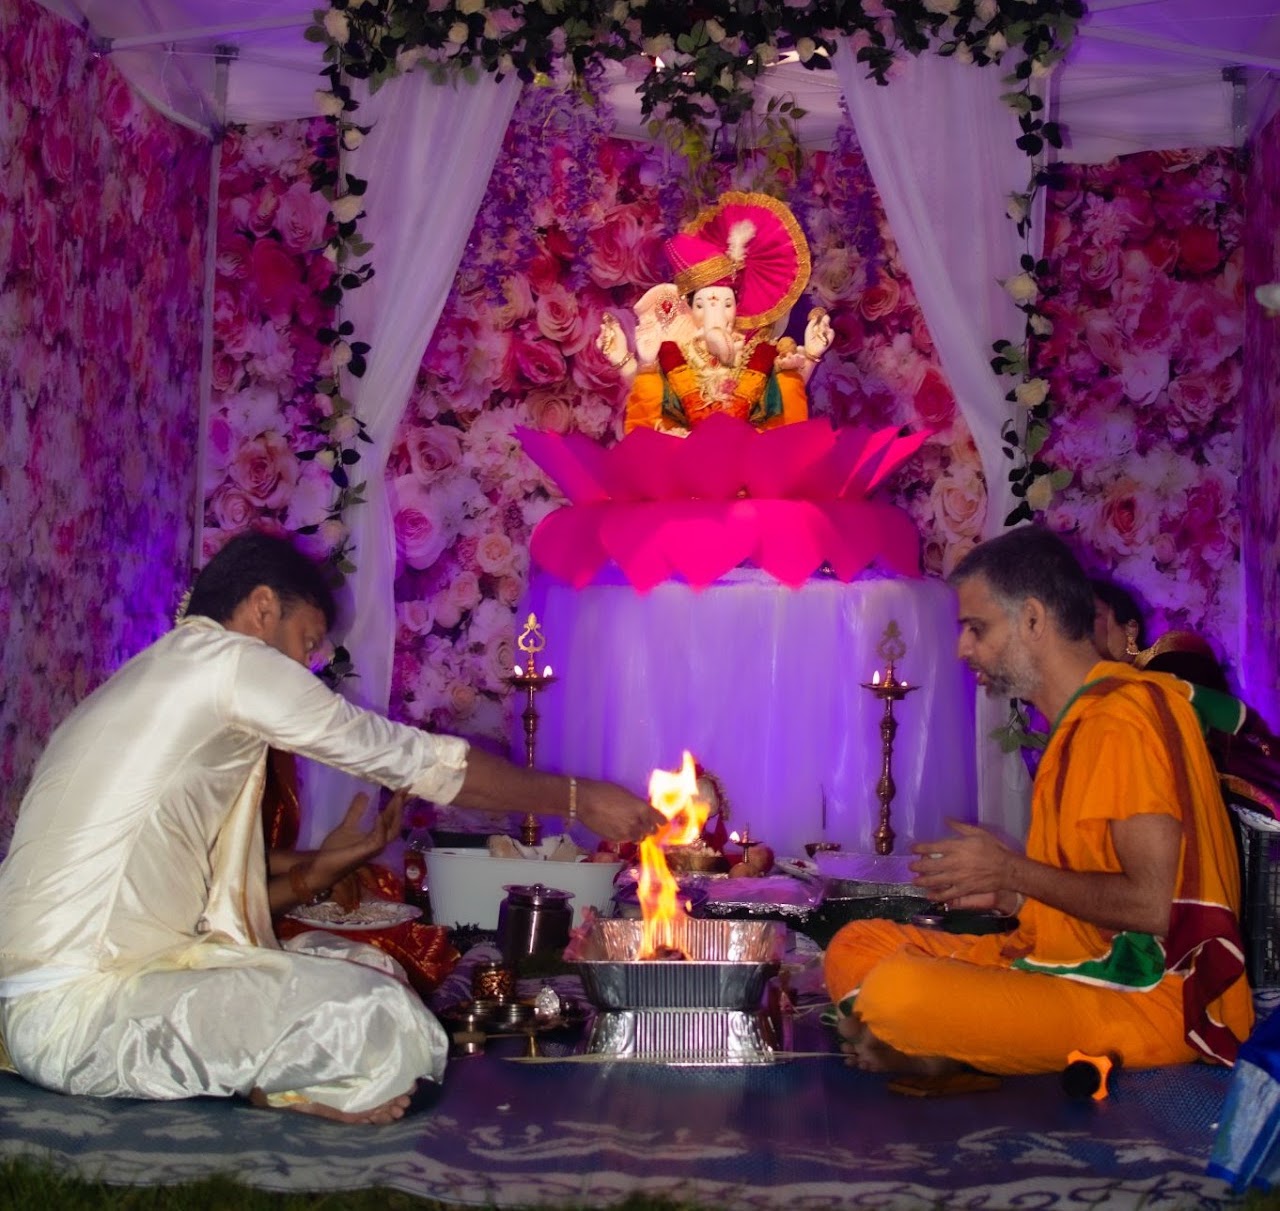 Photos: Local Indian residents celebrate Ganesh festival